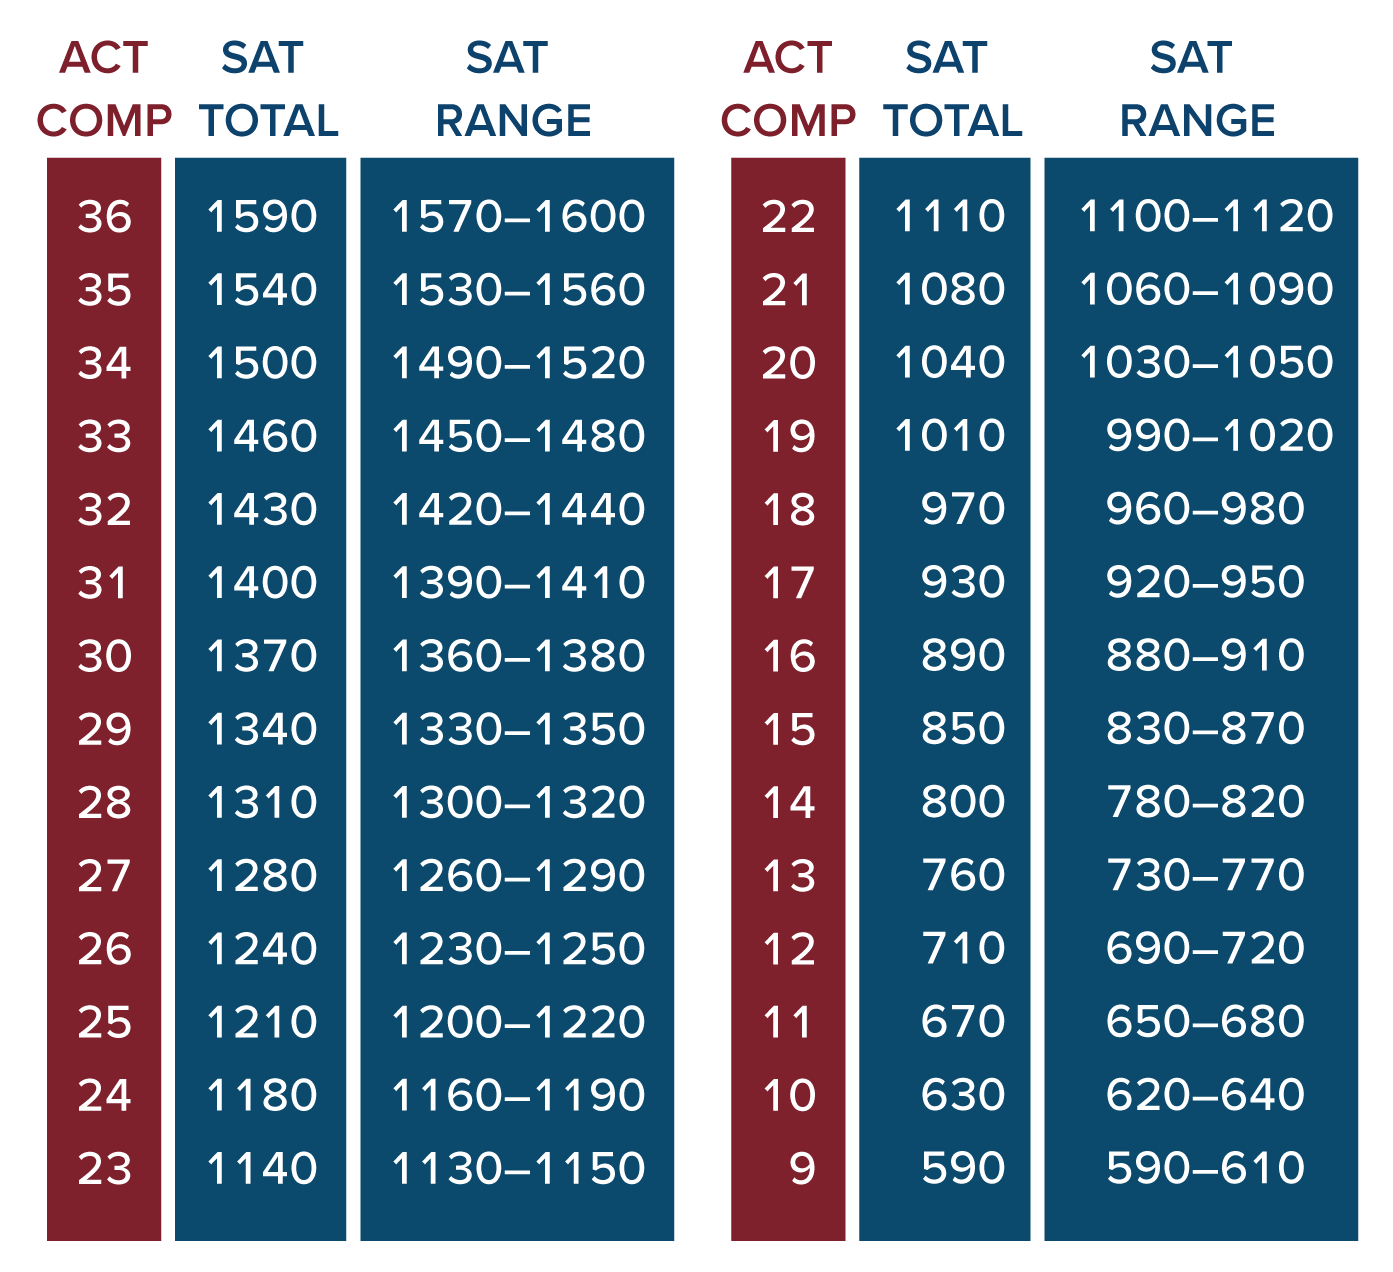 Collection of Concordance Tables for SAT and ACT Scores